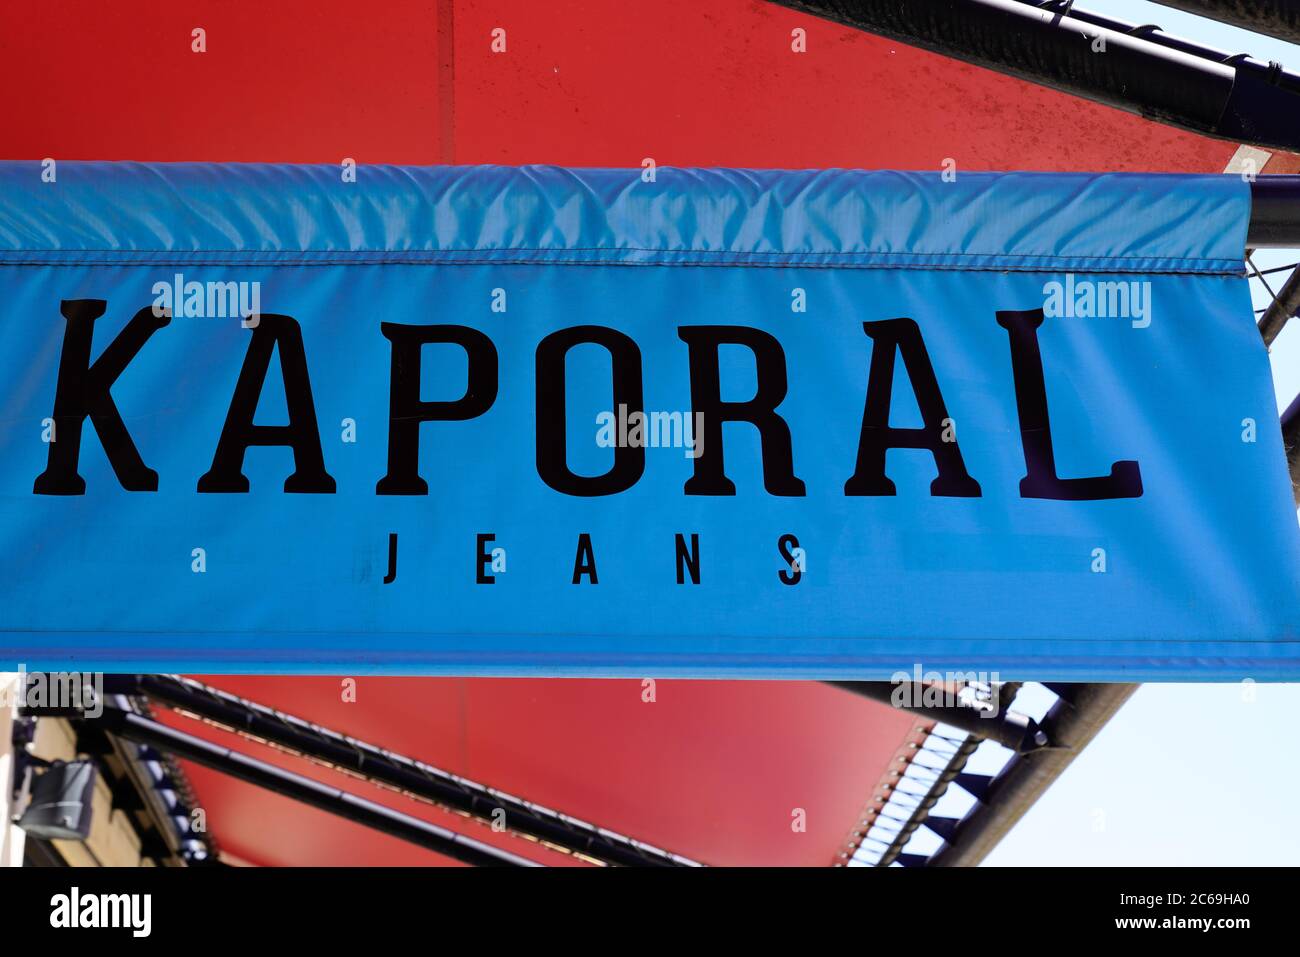 Bordeaux , Aquitaine / France - 07 06 2020 : Kaporal jeans logo and text  sign on shop flag front of fashion store Stock Photo - Alamy